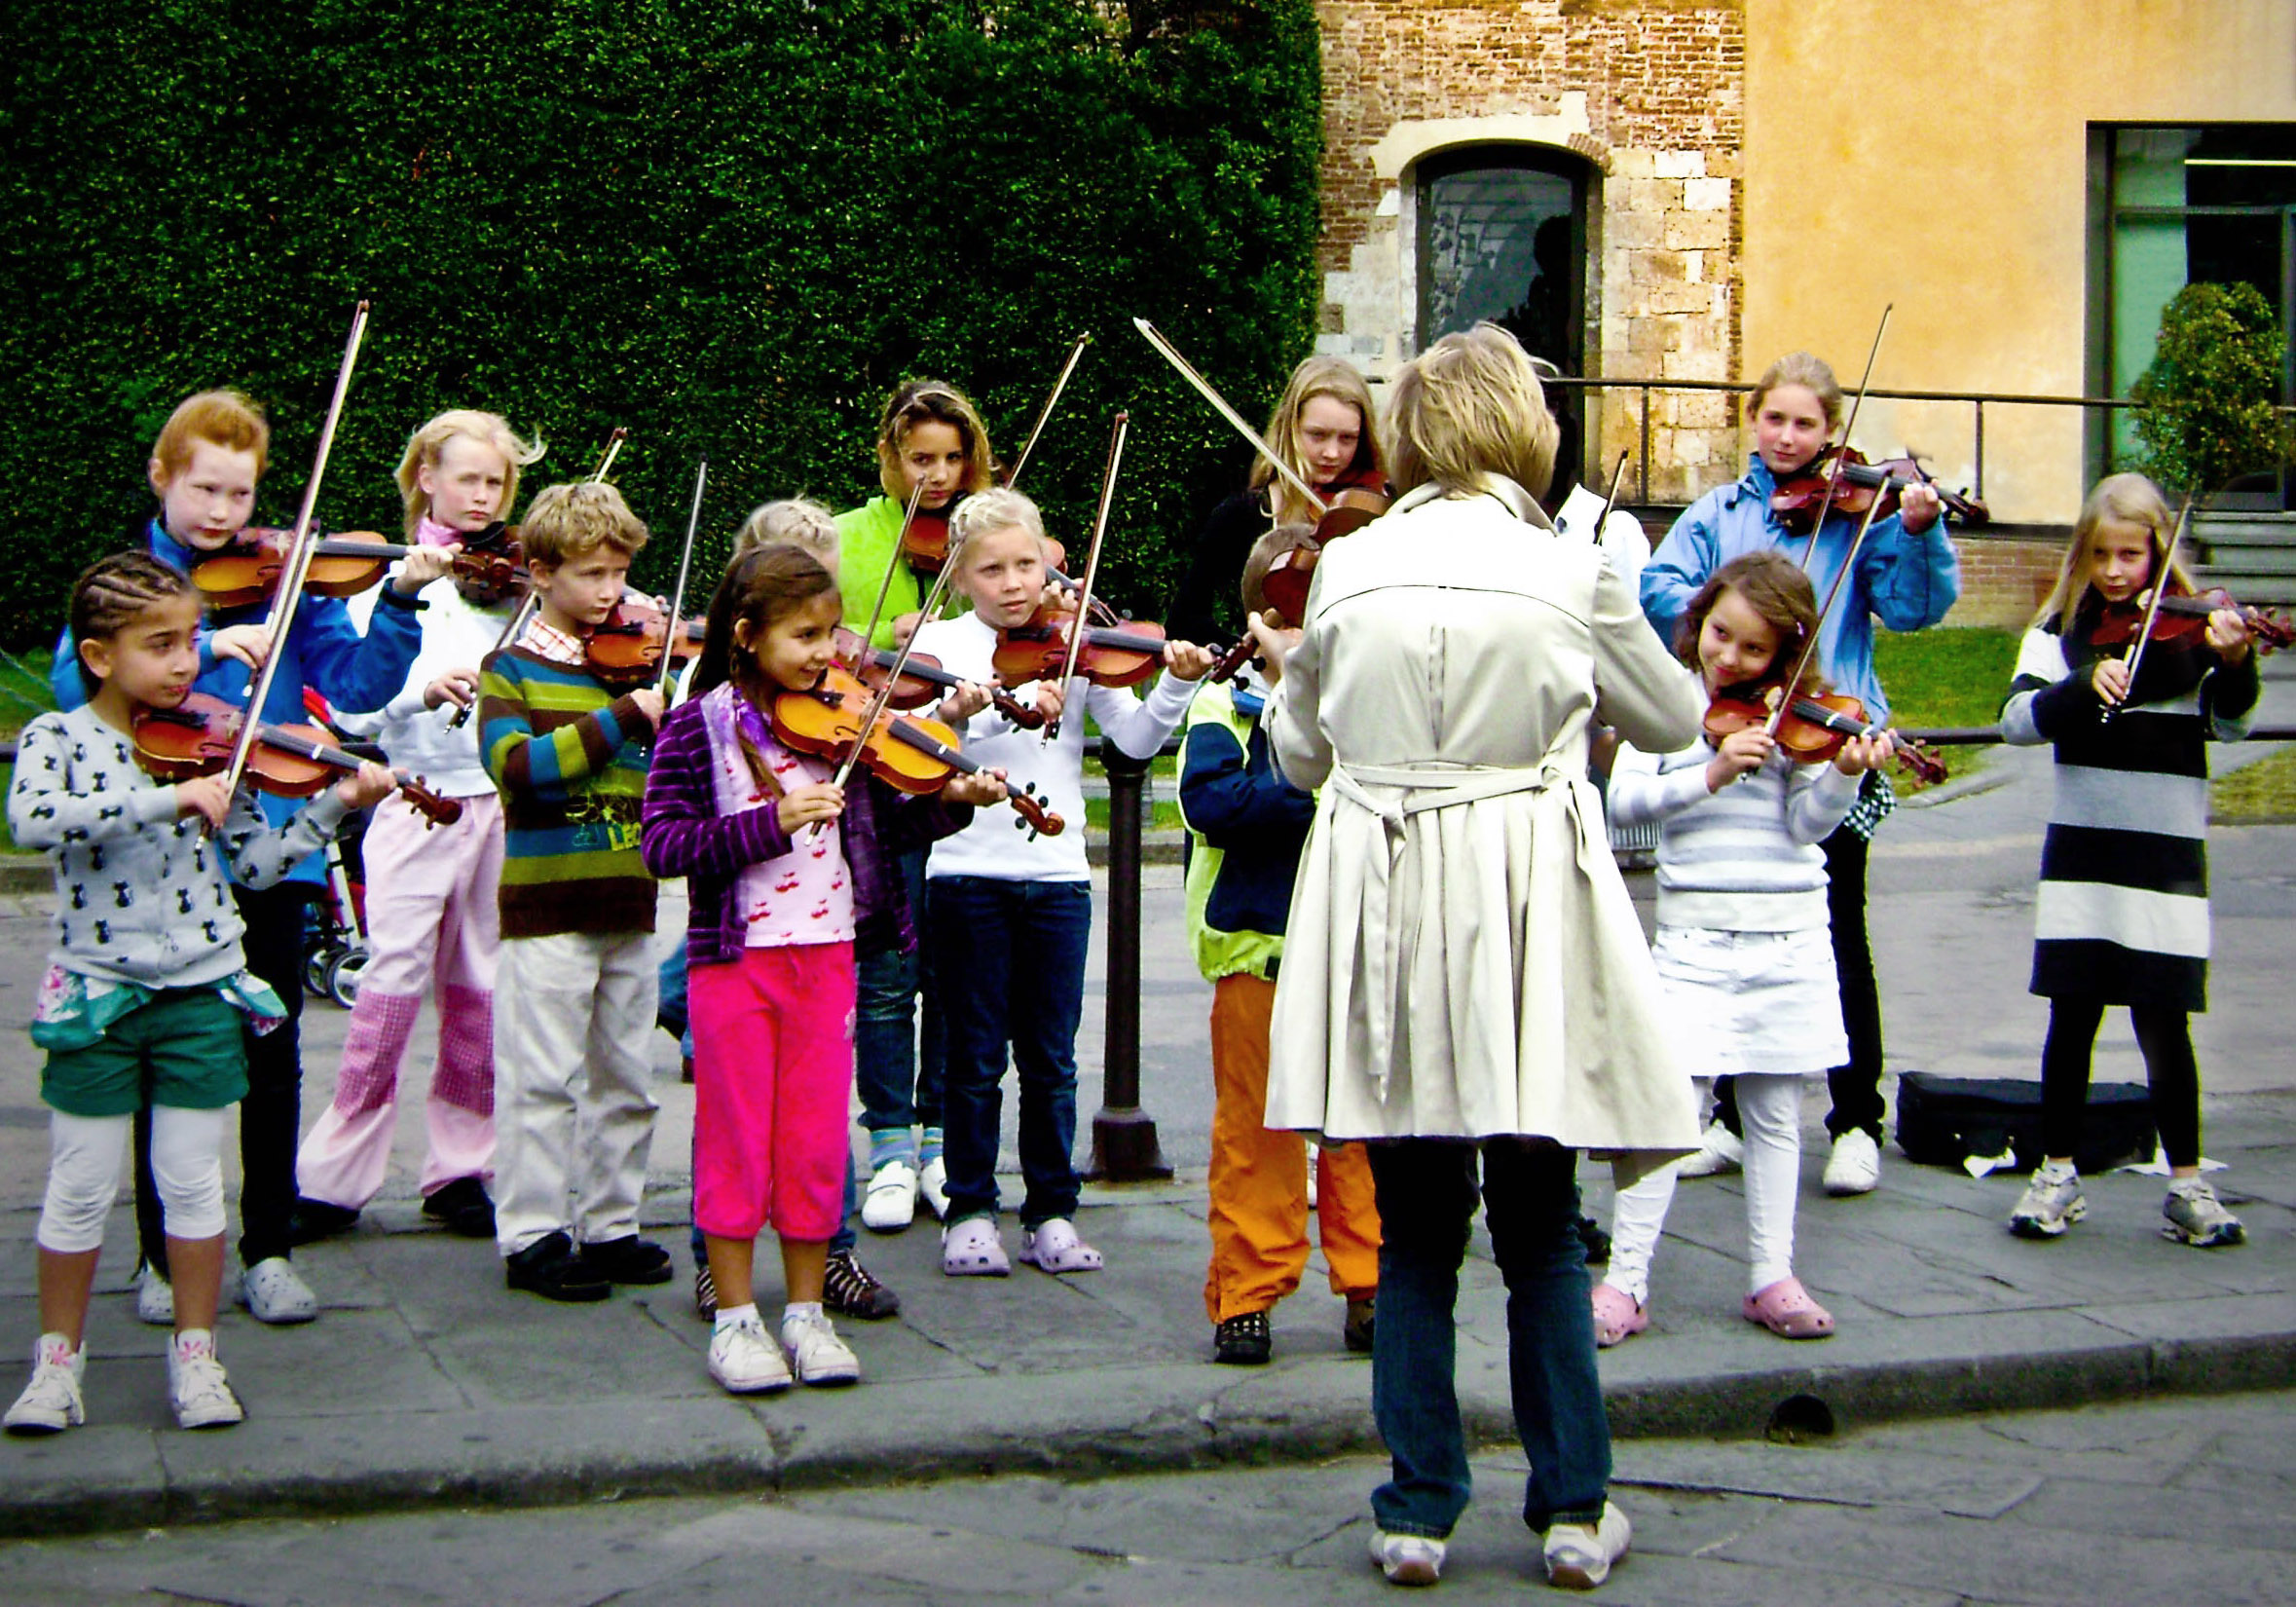 Teacher and a group of children of many ages all playing violin in front of an old brick building